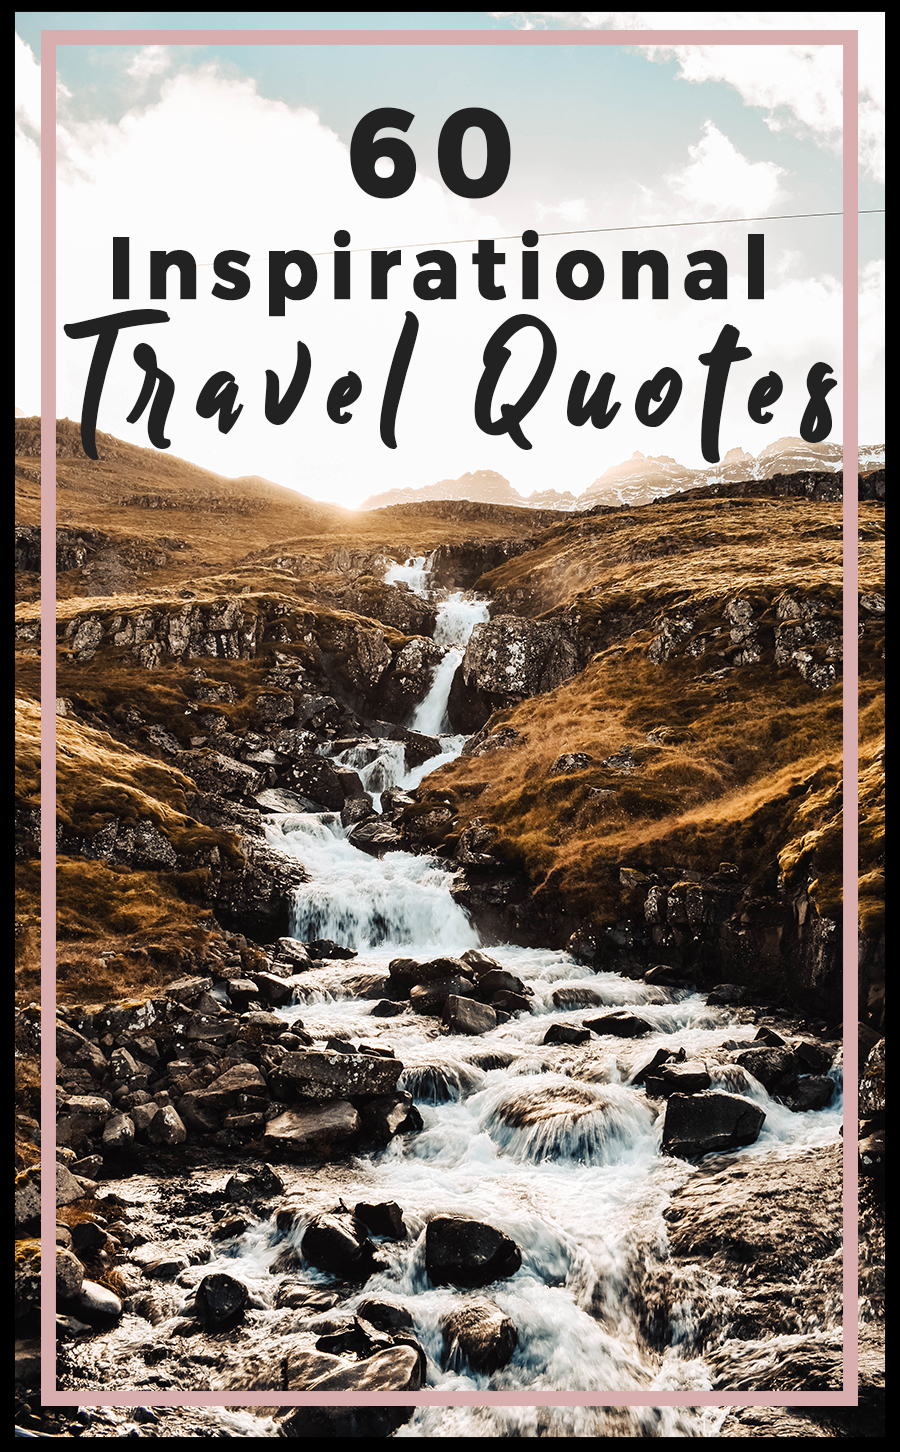 60 inspirational travel quotes